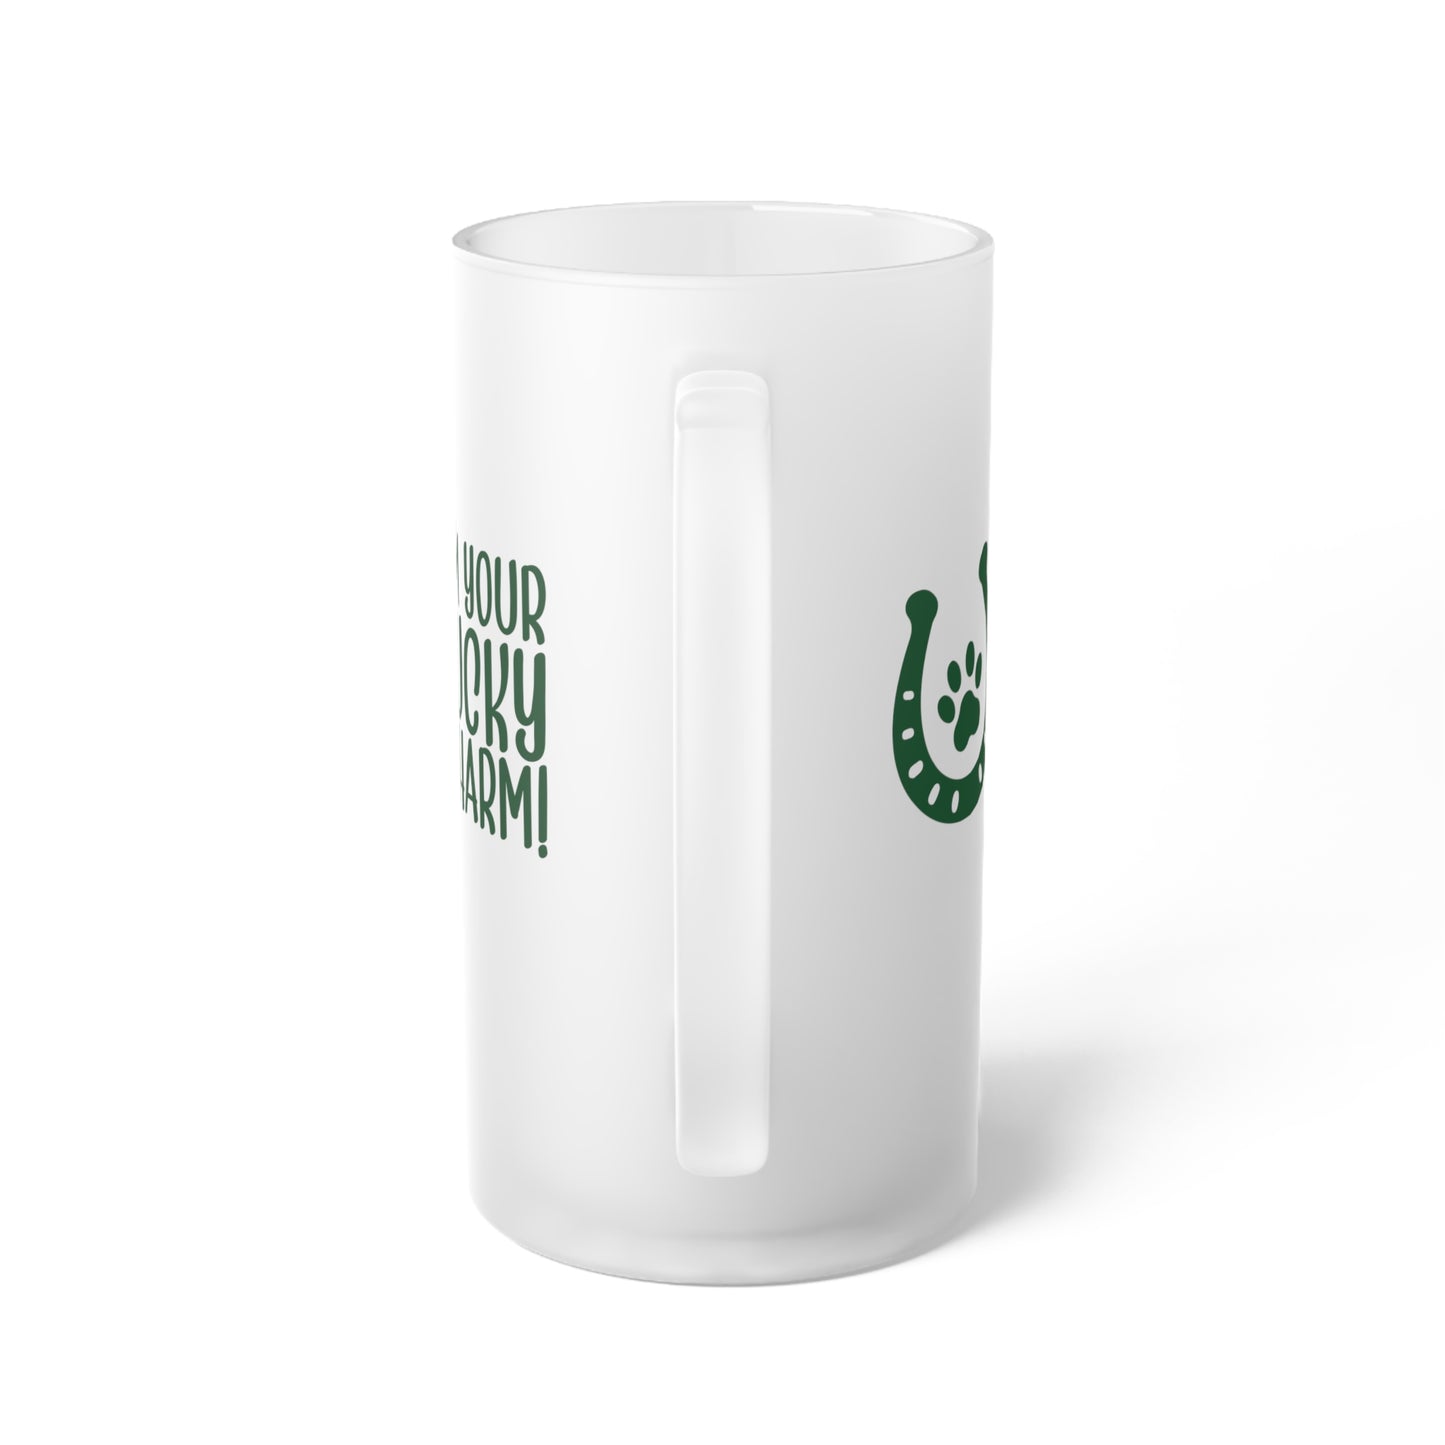 I'm Your Lucky Charm Frosted Glass Beer Mug